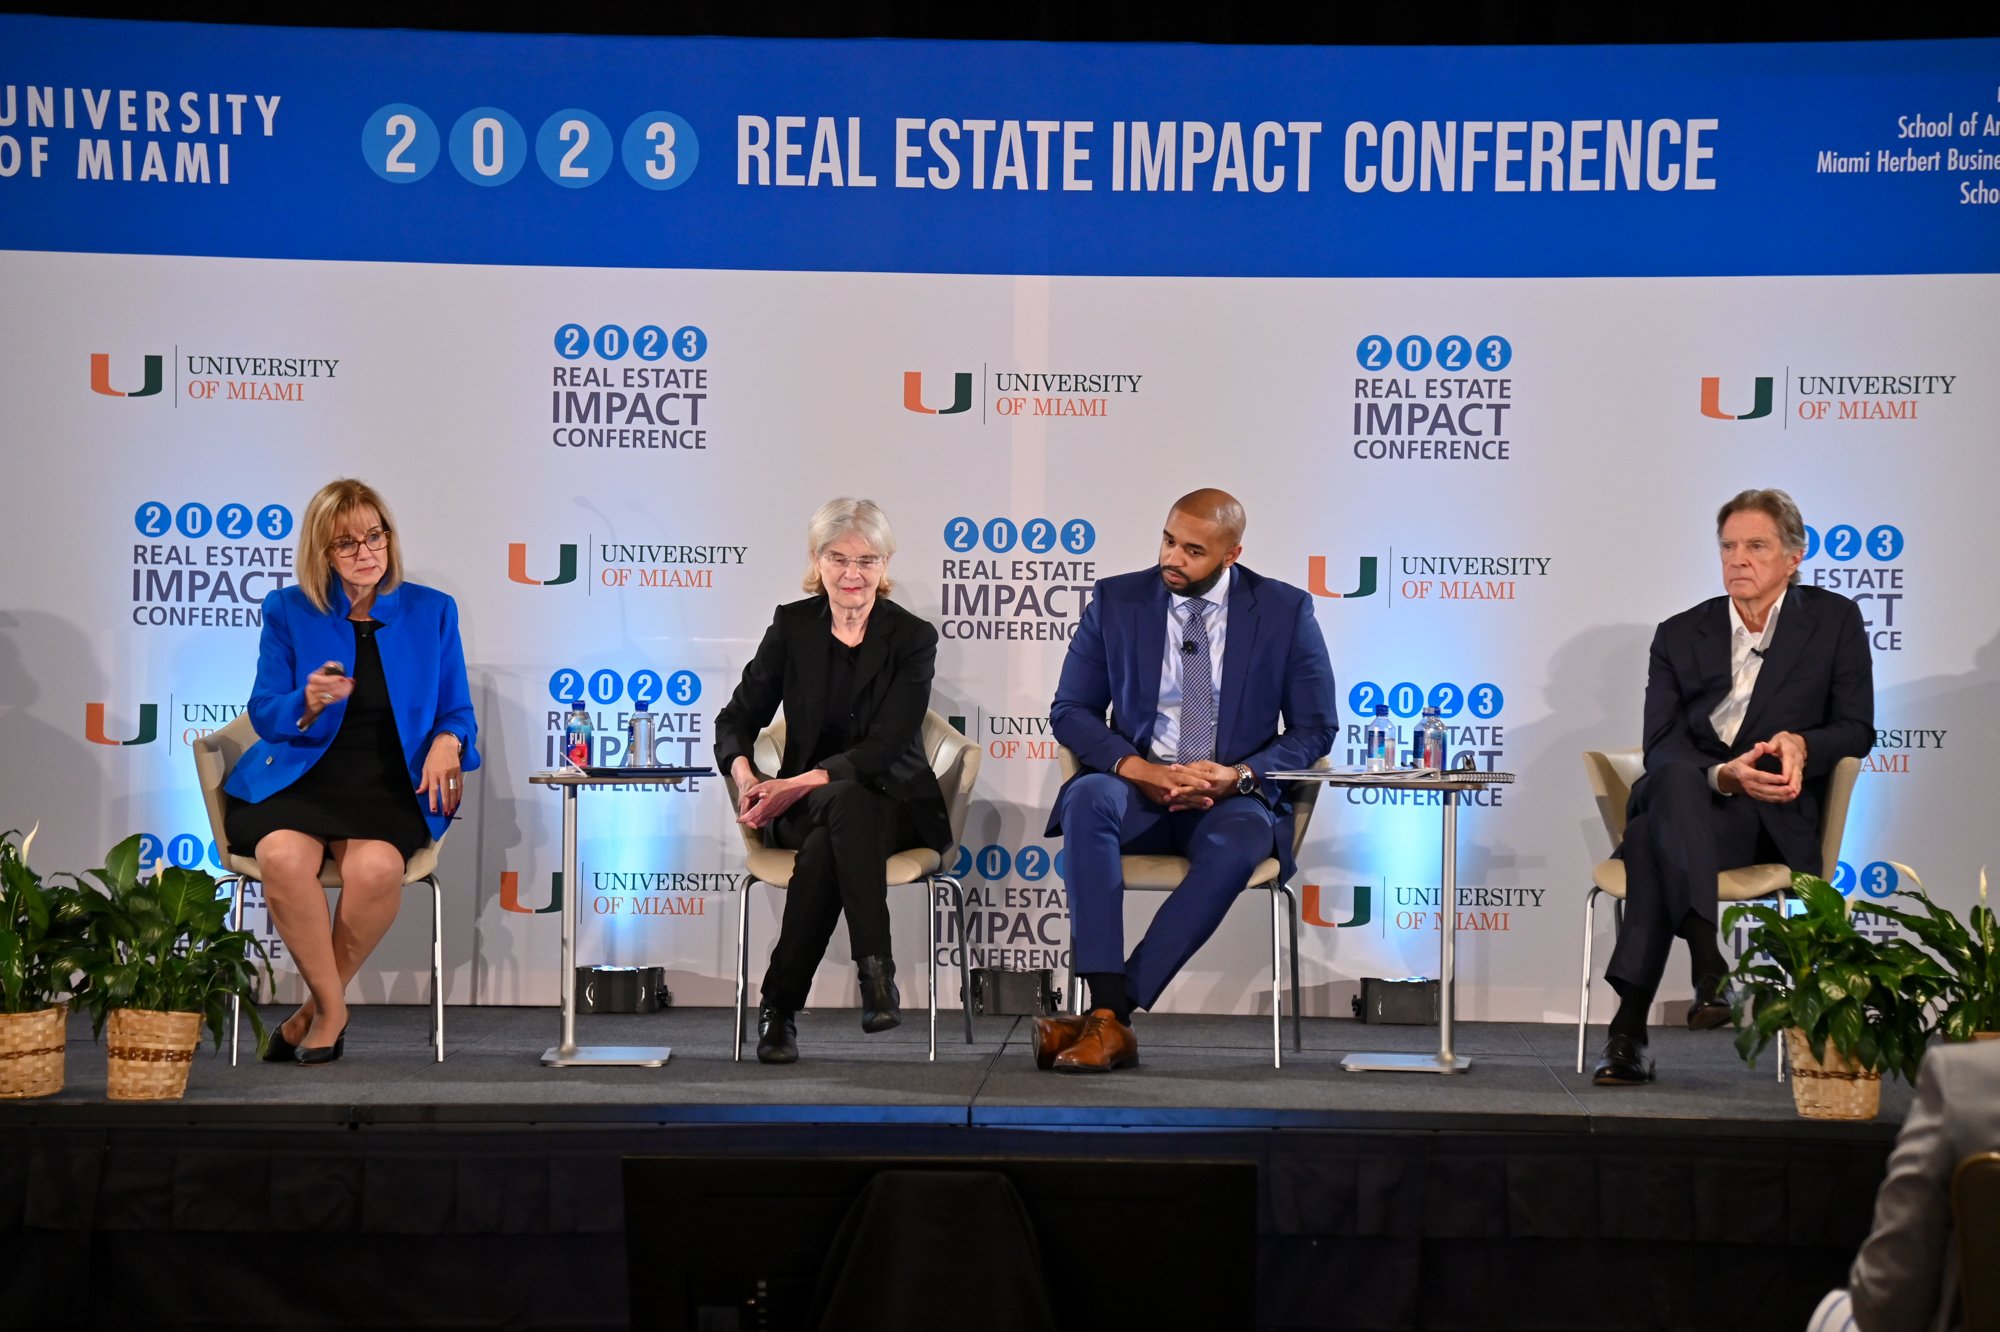 University of Miami Real Estate Impact Conference 2023 The Largest Edition Yet As Real Estate Leaders Discuss The State of Miami Real Estate 419.jpg